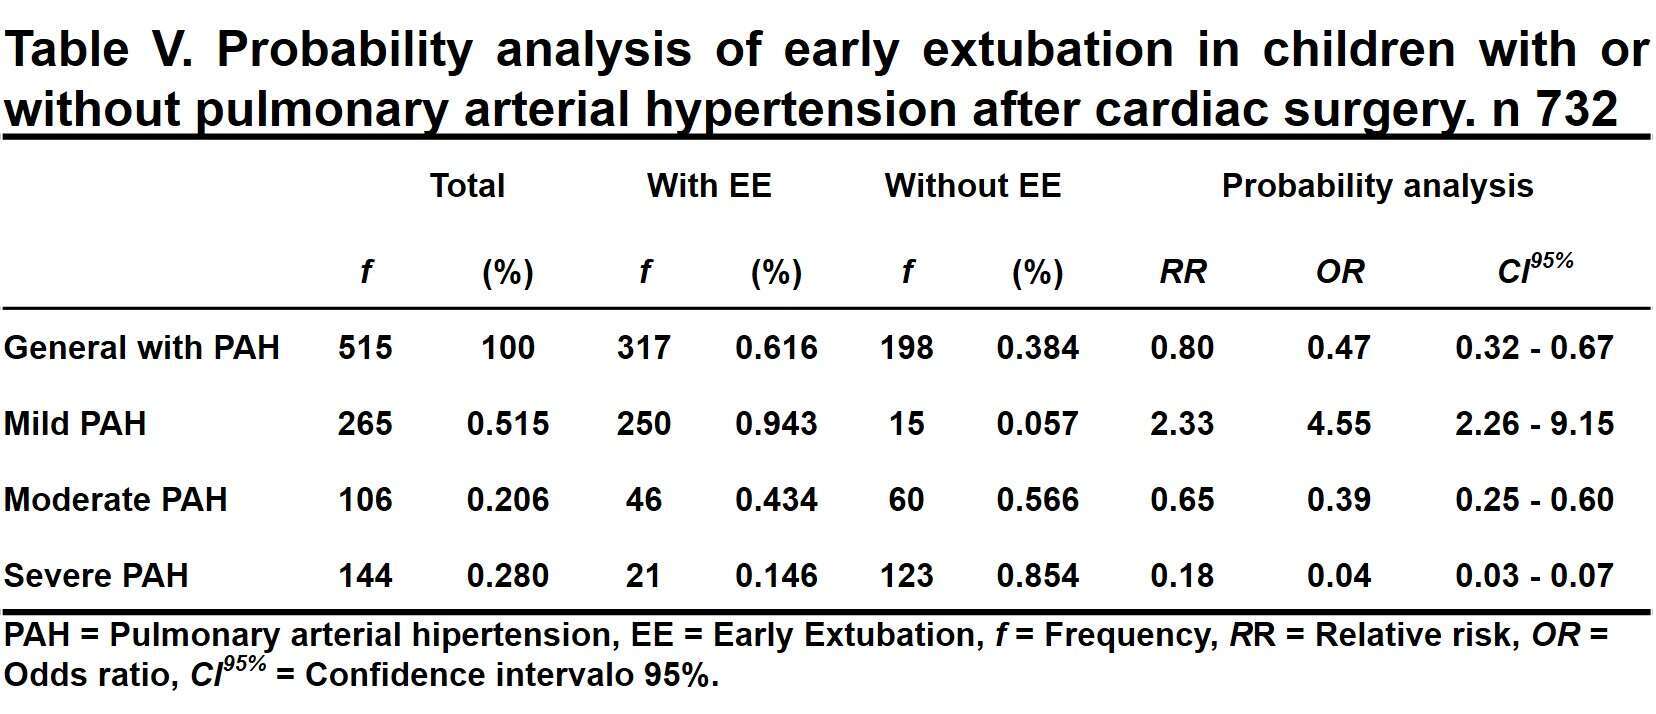 Table V. Probability analysis of early extubation in children with or without pulmonary arterial hypertension after cardiac surgery